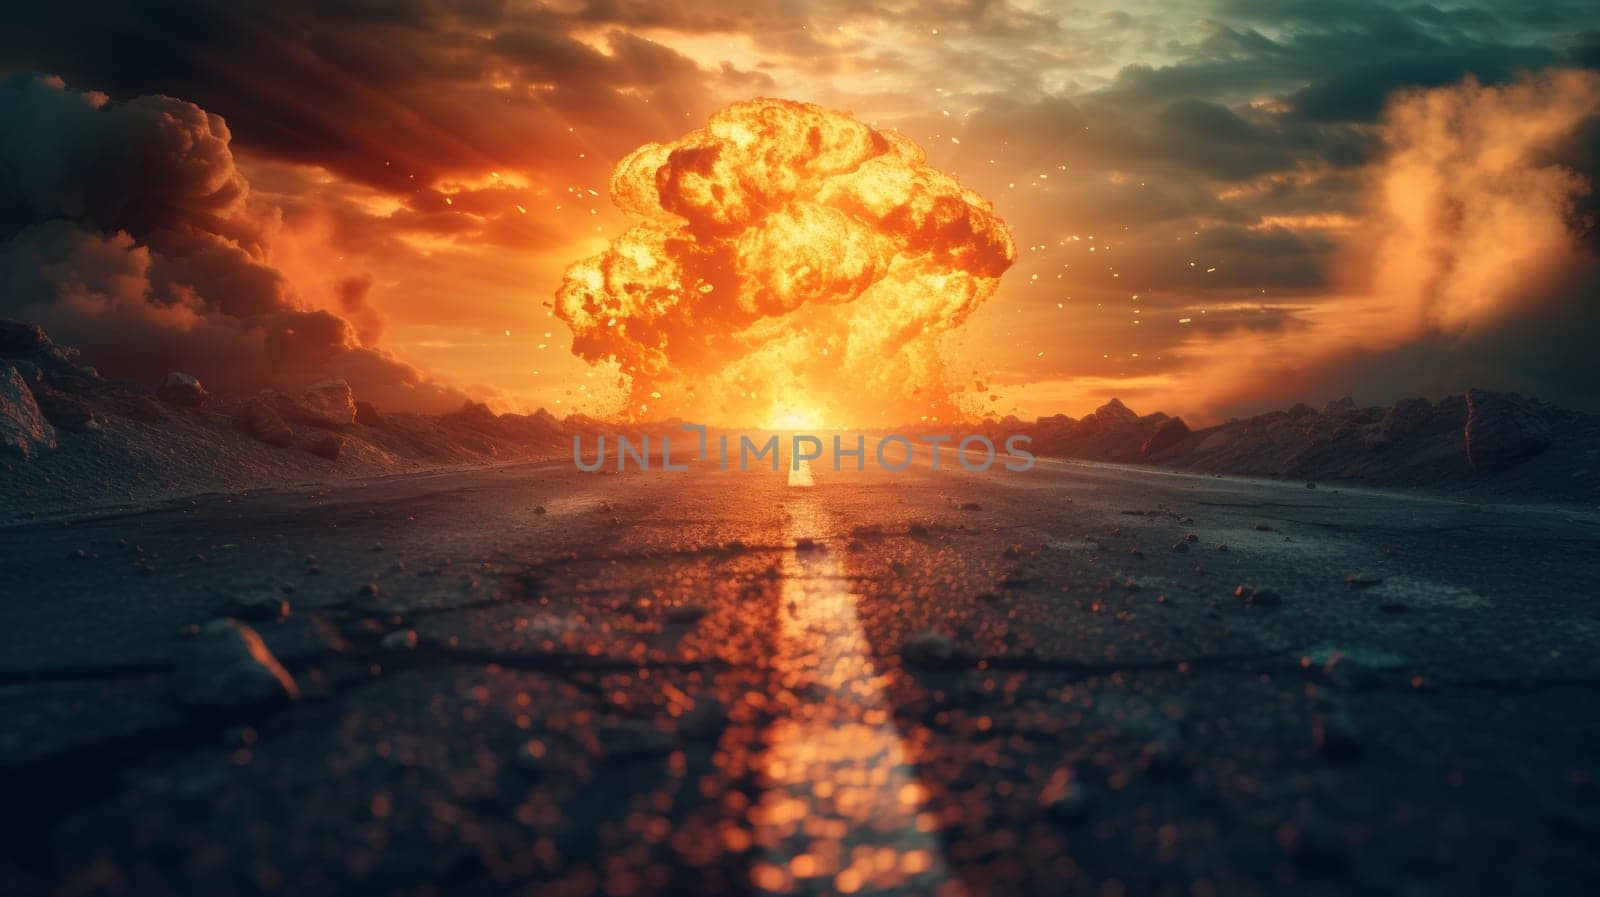 A large explosion is seen in the distance on a road